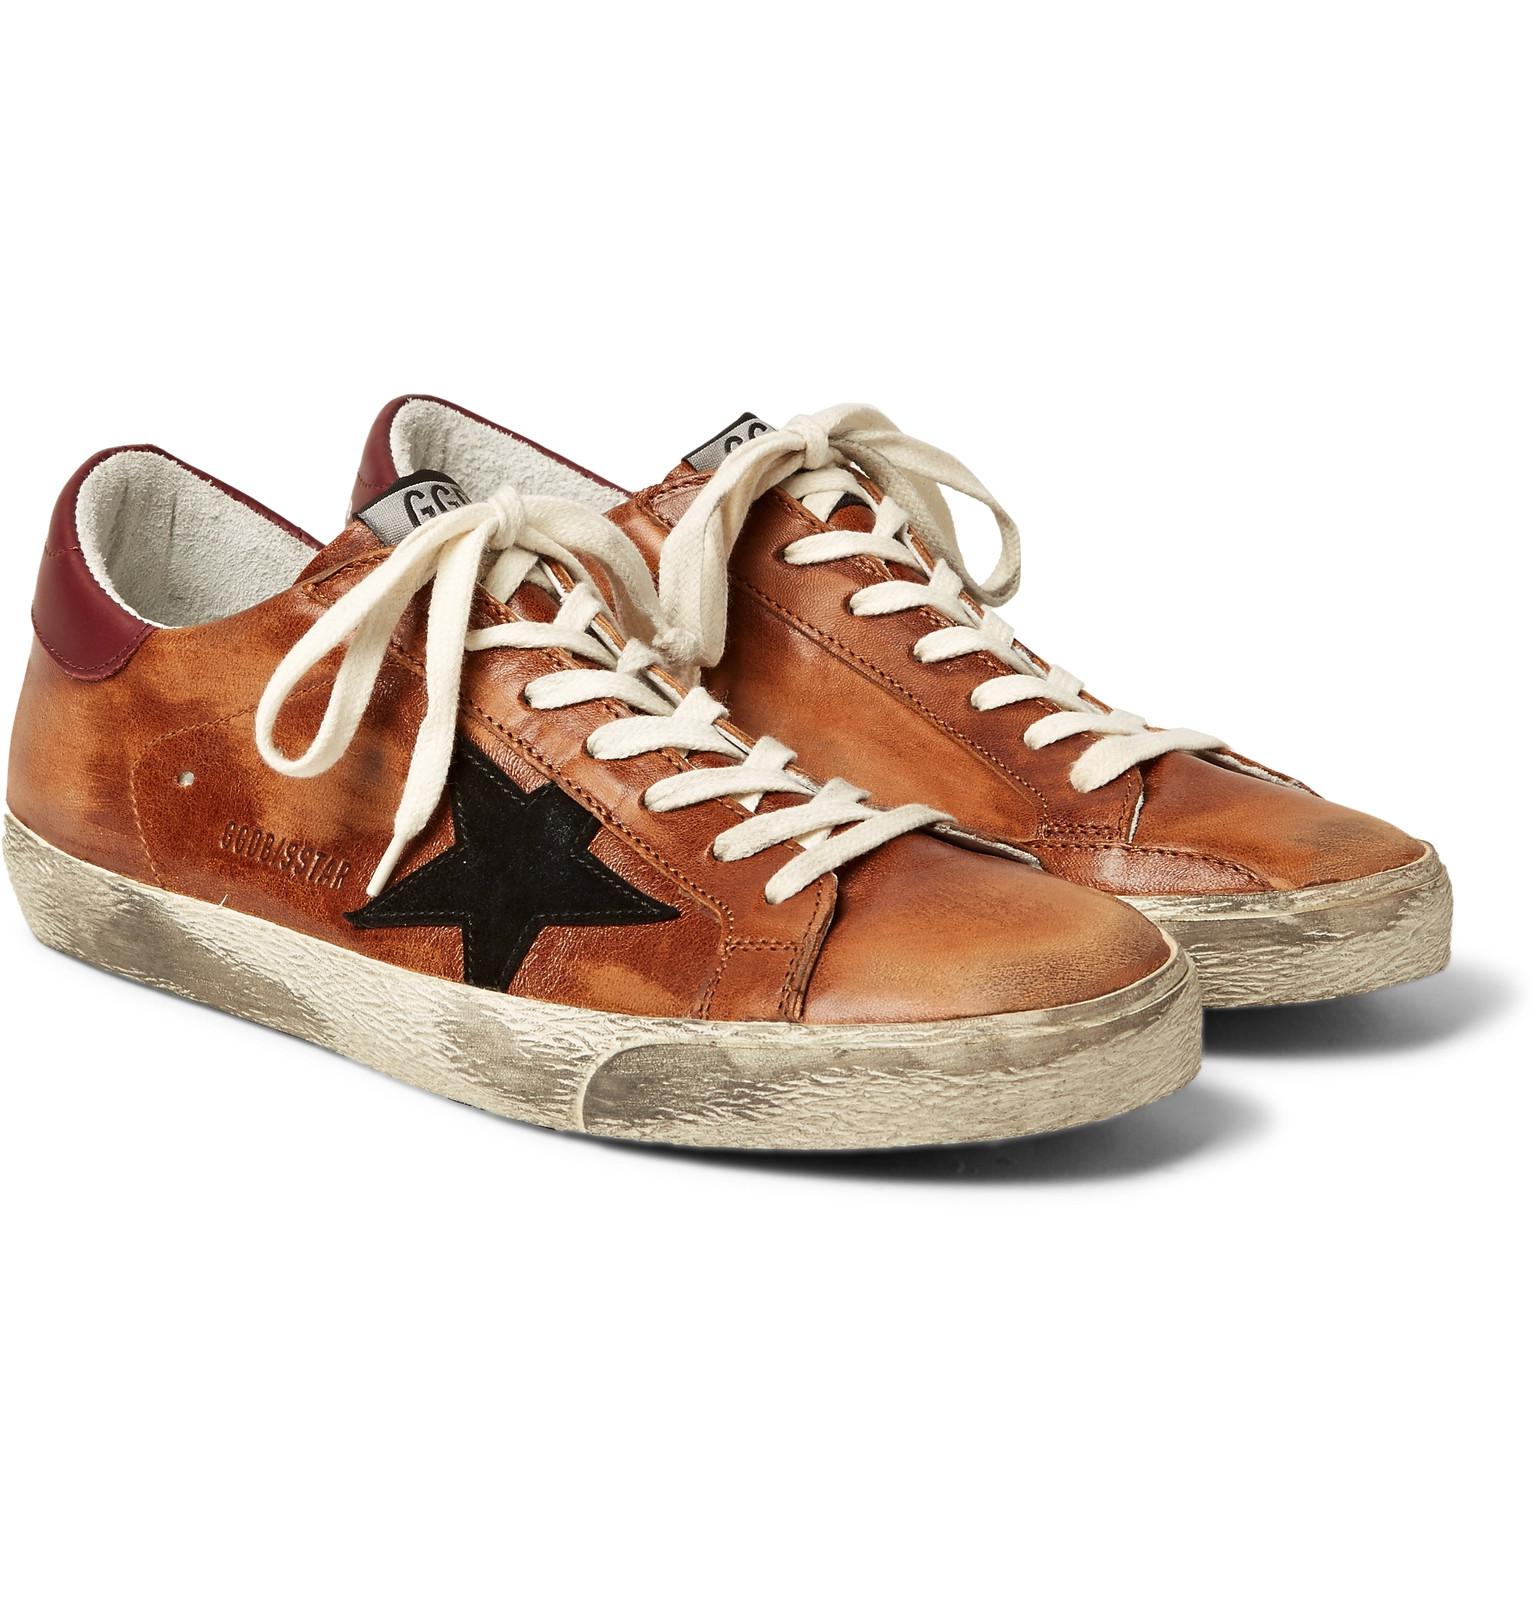 superstar distressed leather and suede sneakers